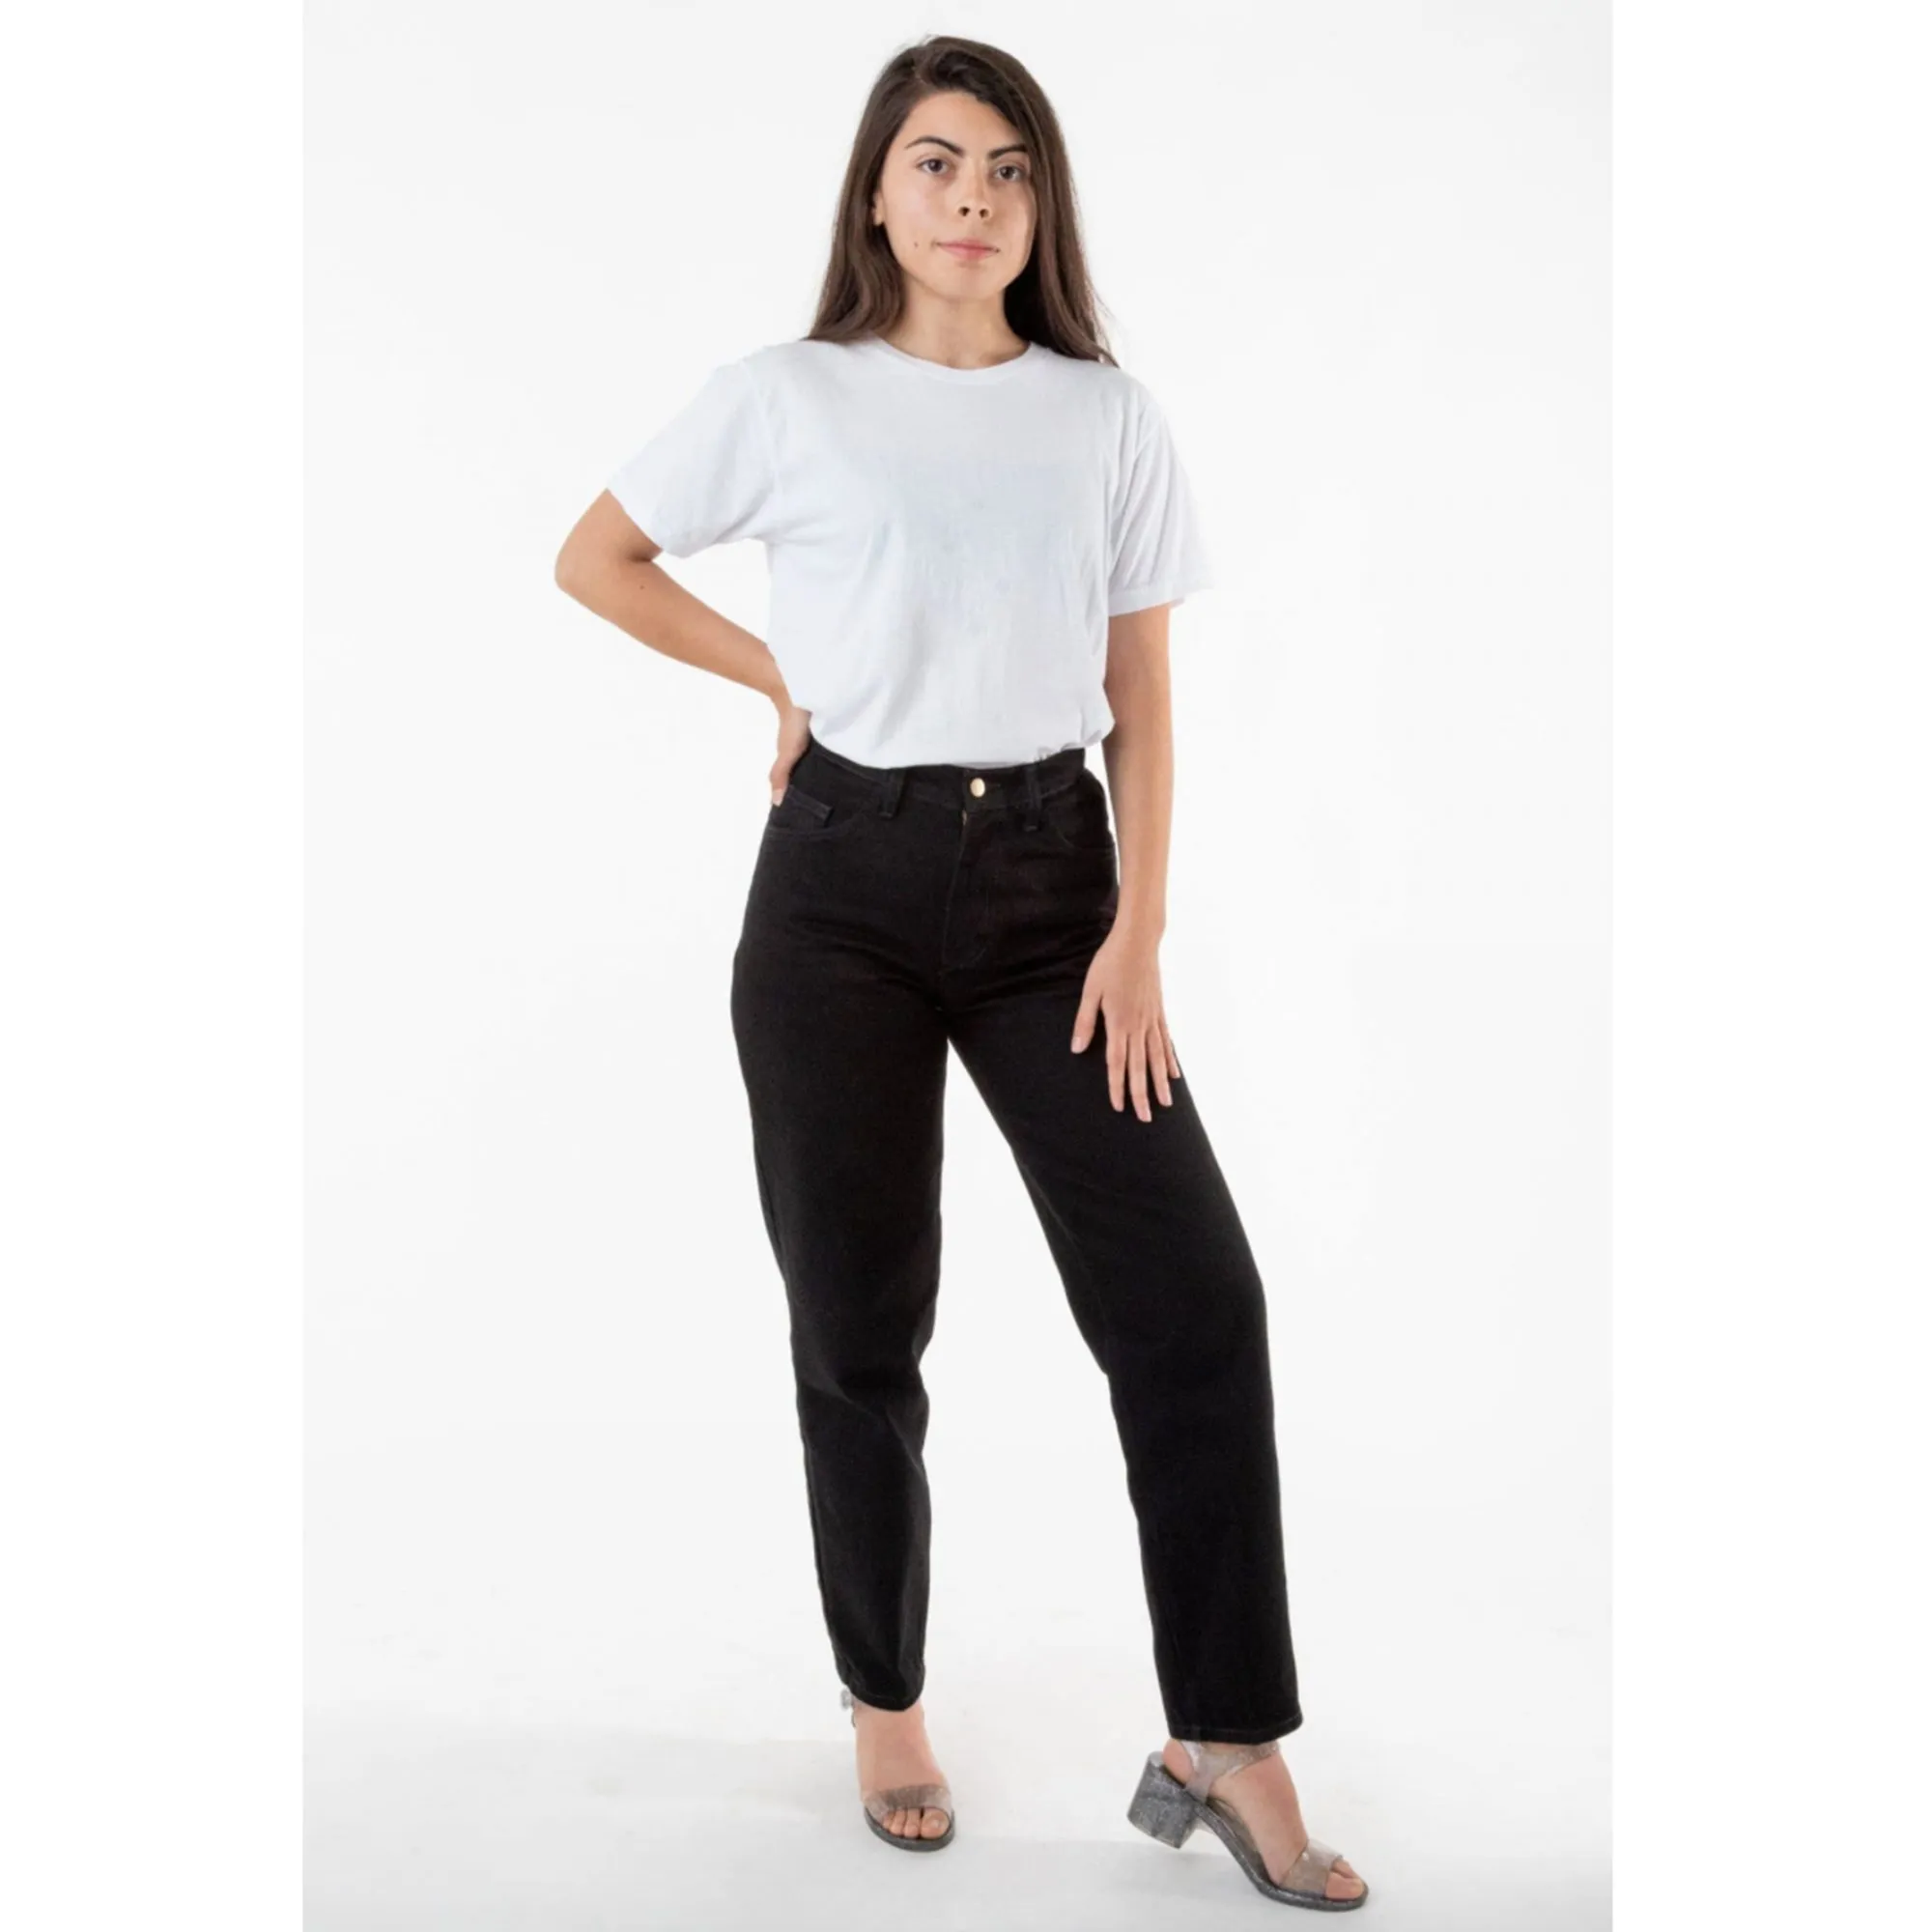 los-angeles-apparel-relaxed-fit-jeans, best-jeans-for-women